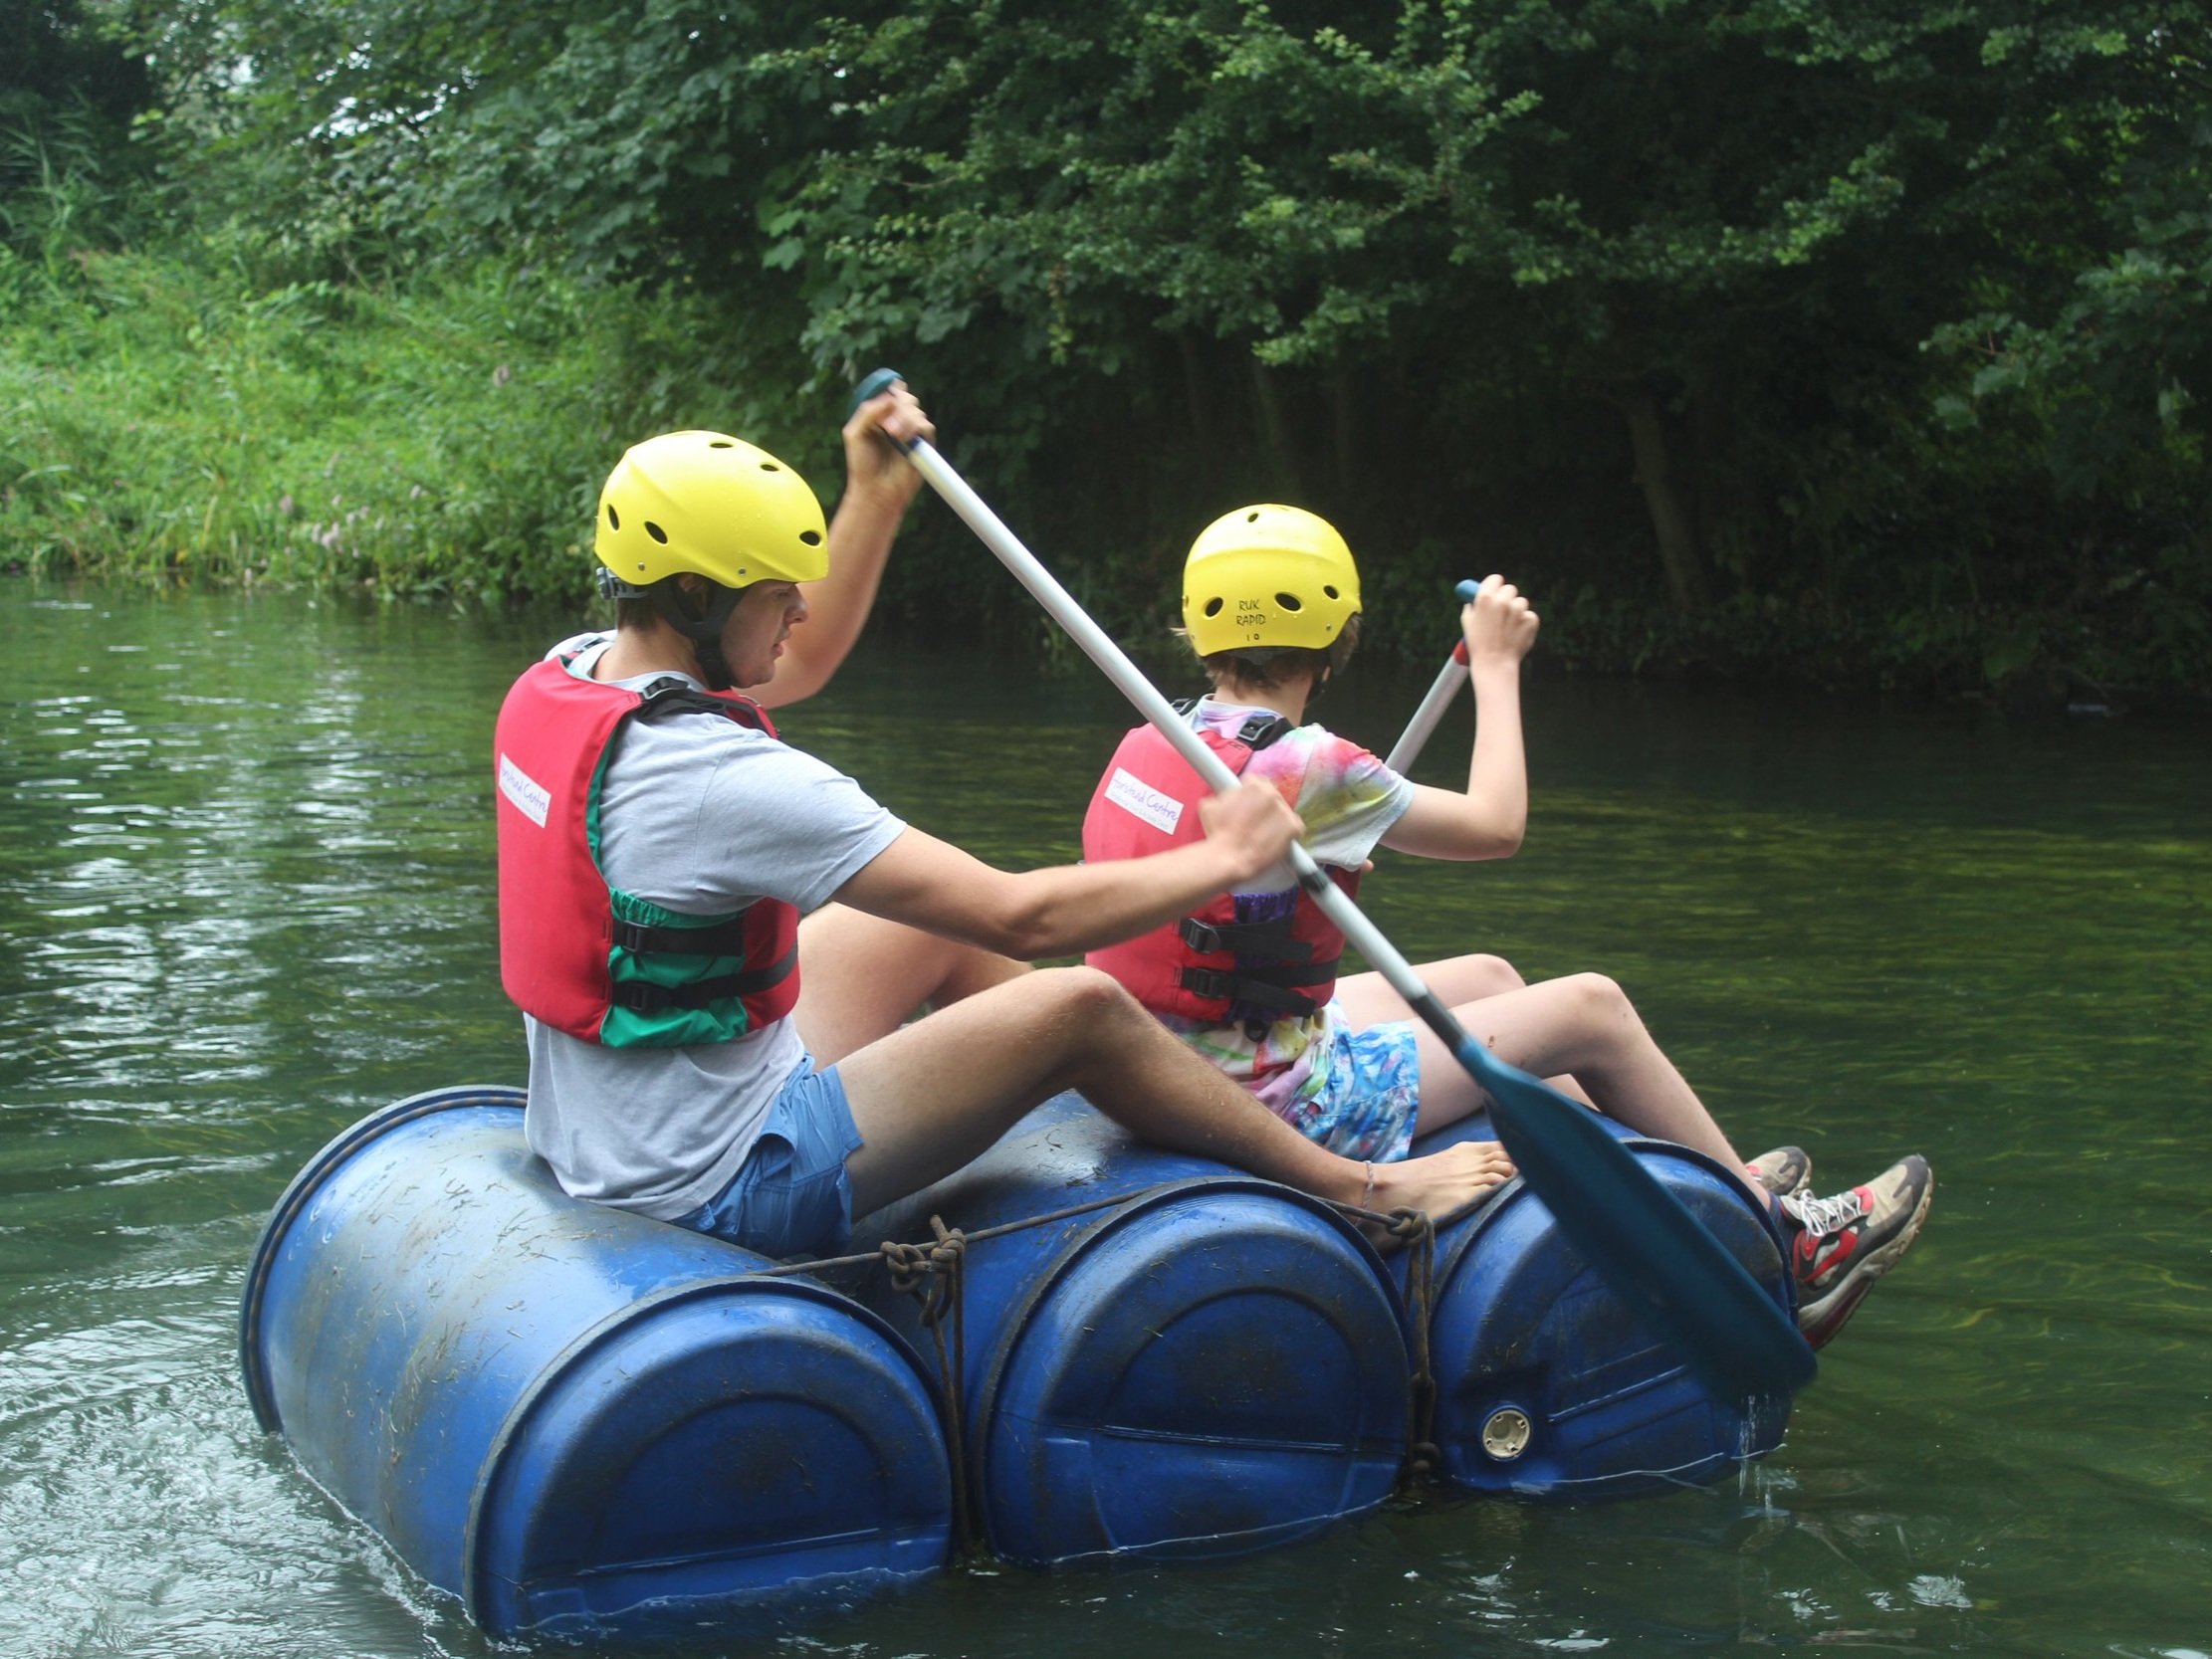 Rafting on a multi-activity holiday for children